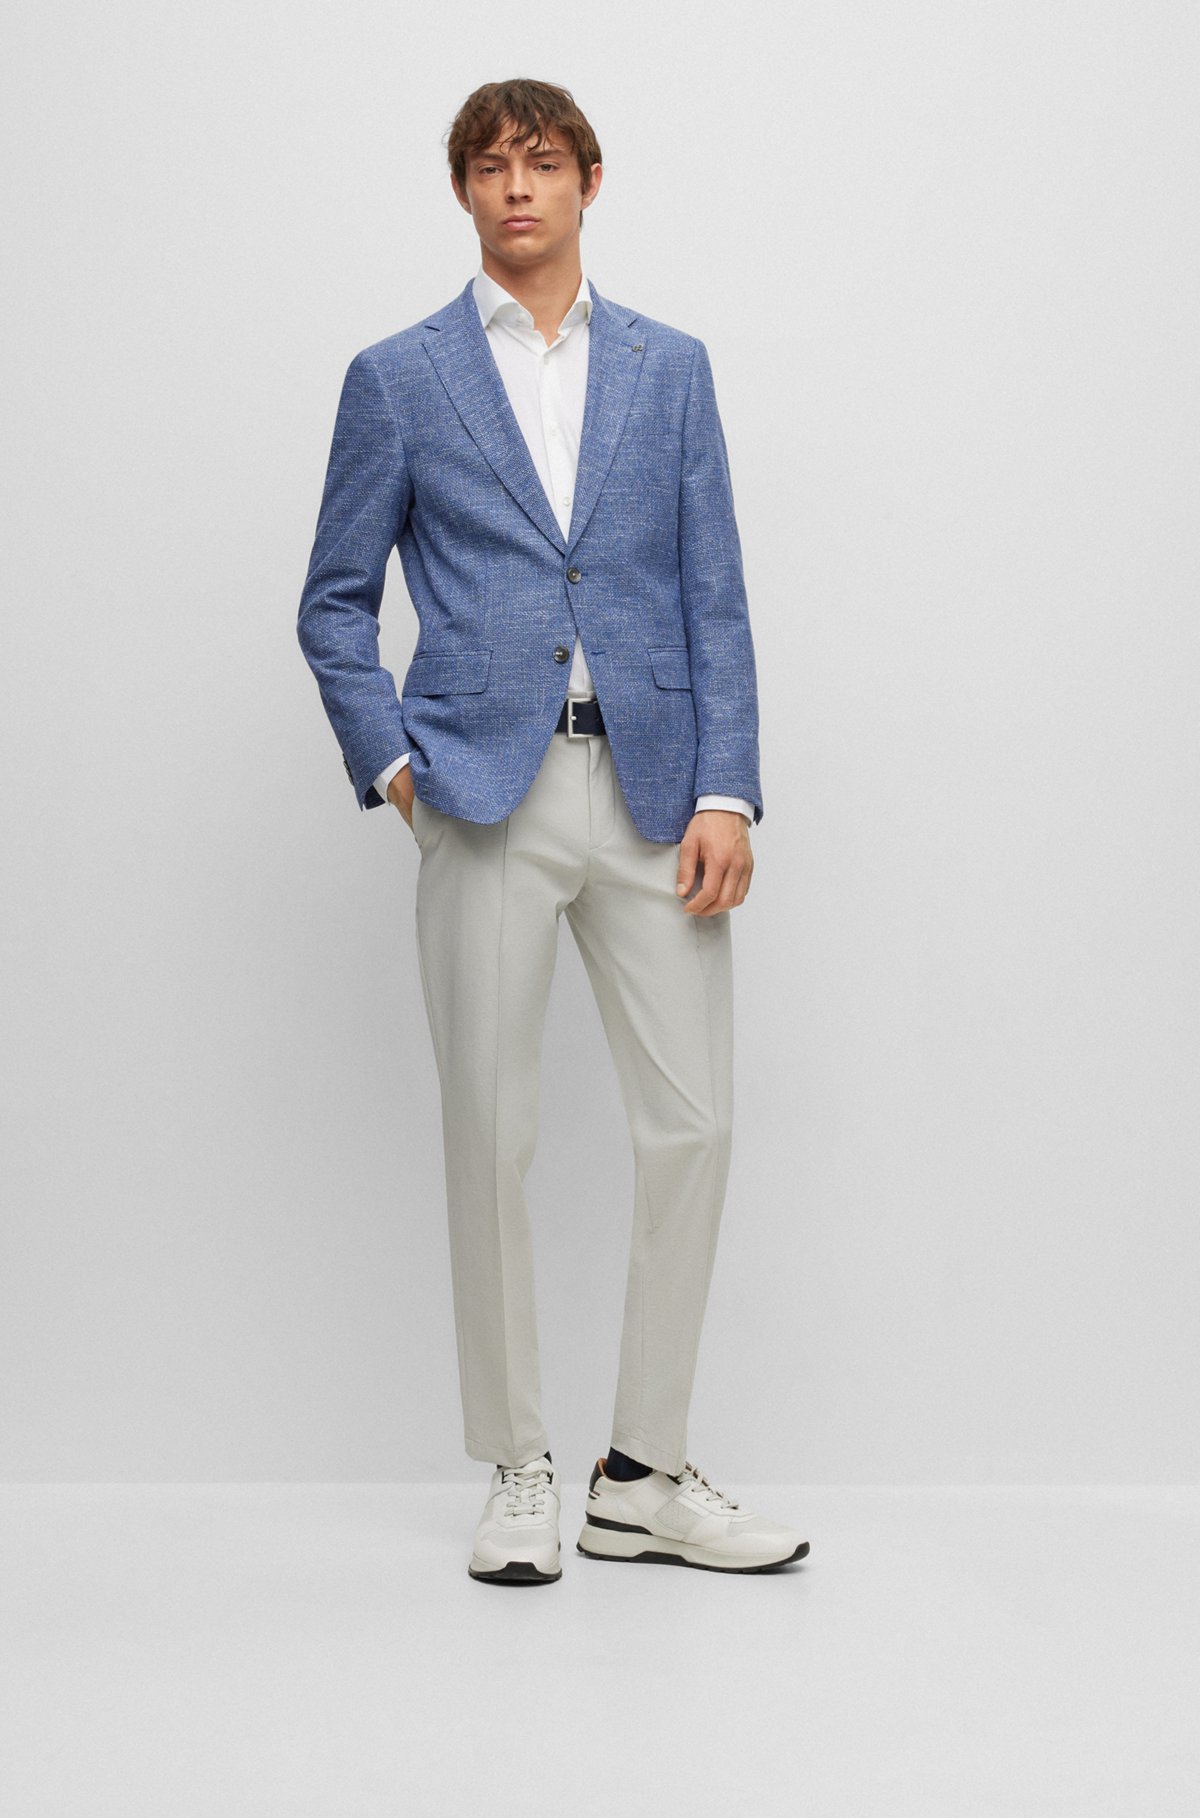 Slim-fit jacket in a micro-patterned cotton blend, Blue